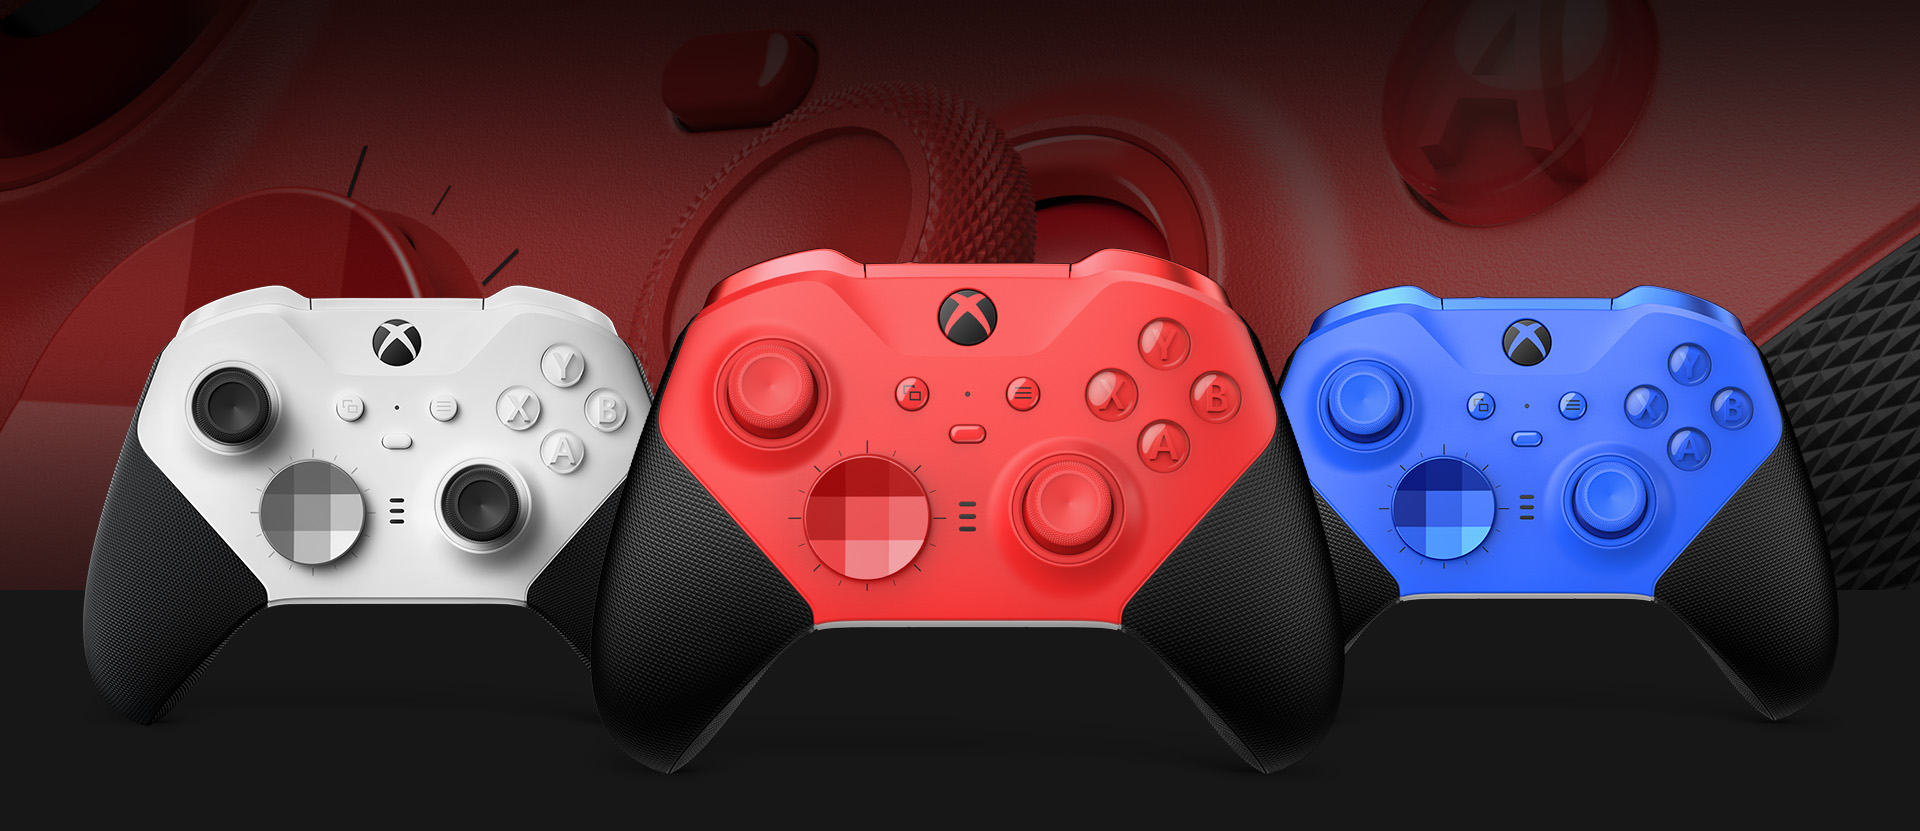 Front view of the Xbox Elite Wireless Controller Series 2 – Core (Red) with other color options shown alongside. A close up of the controller thumbsticks and textured grip is in the background.